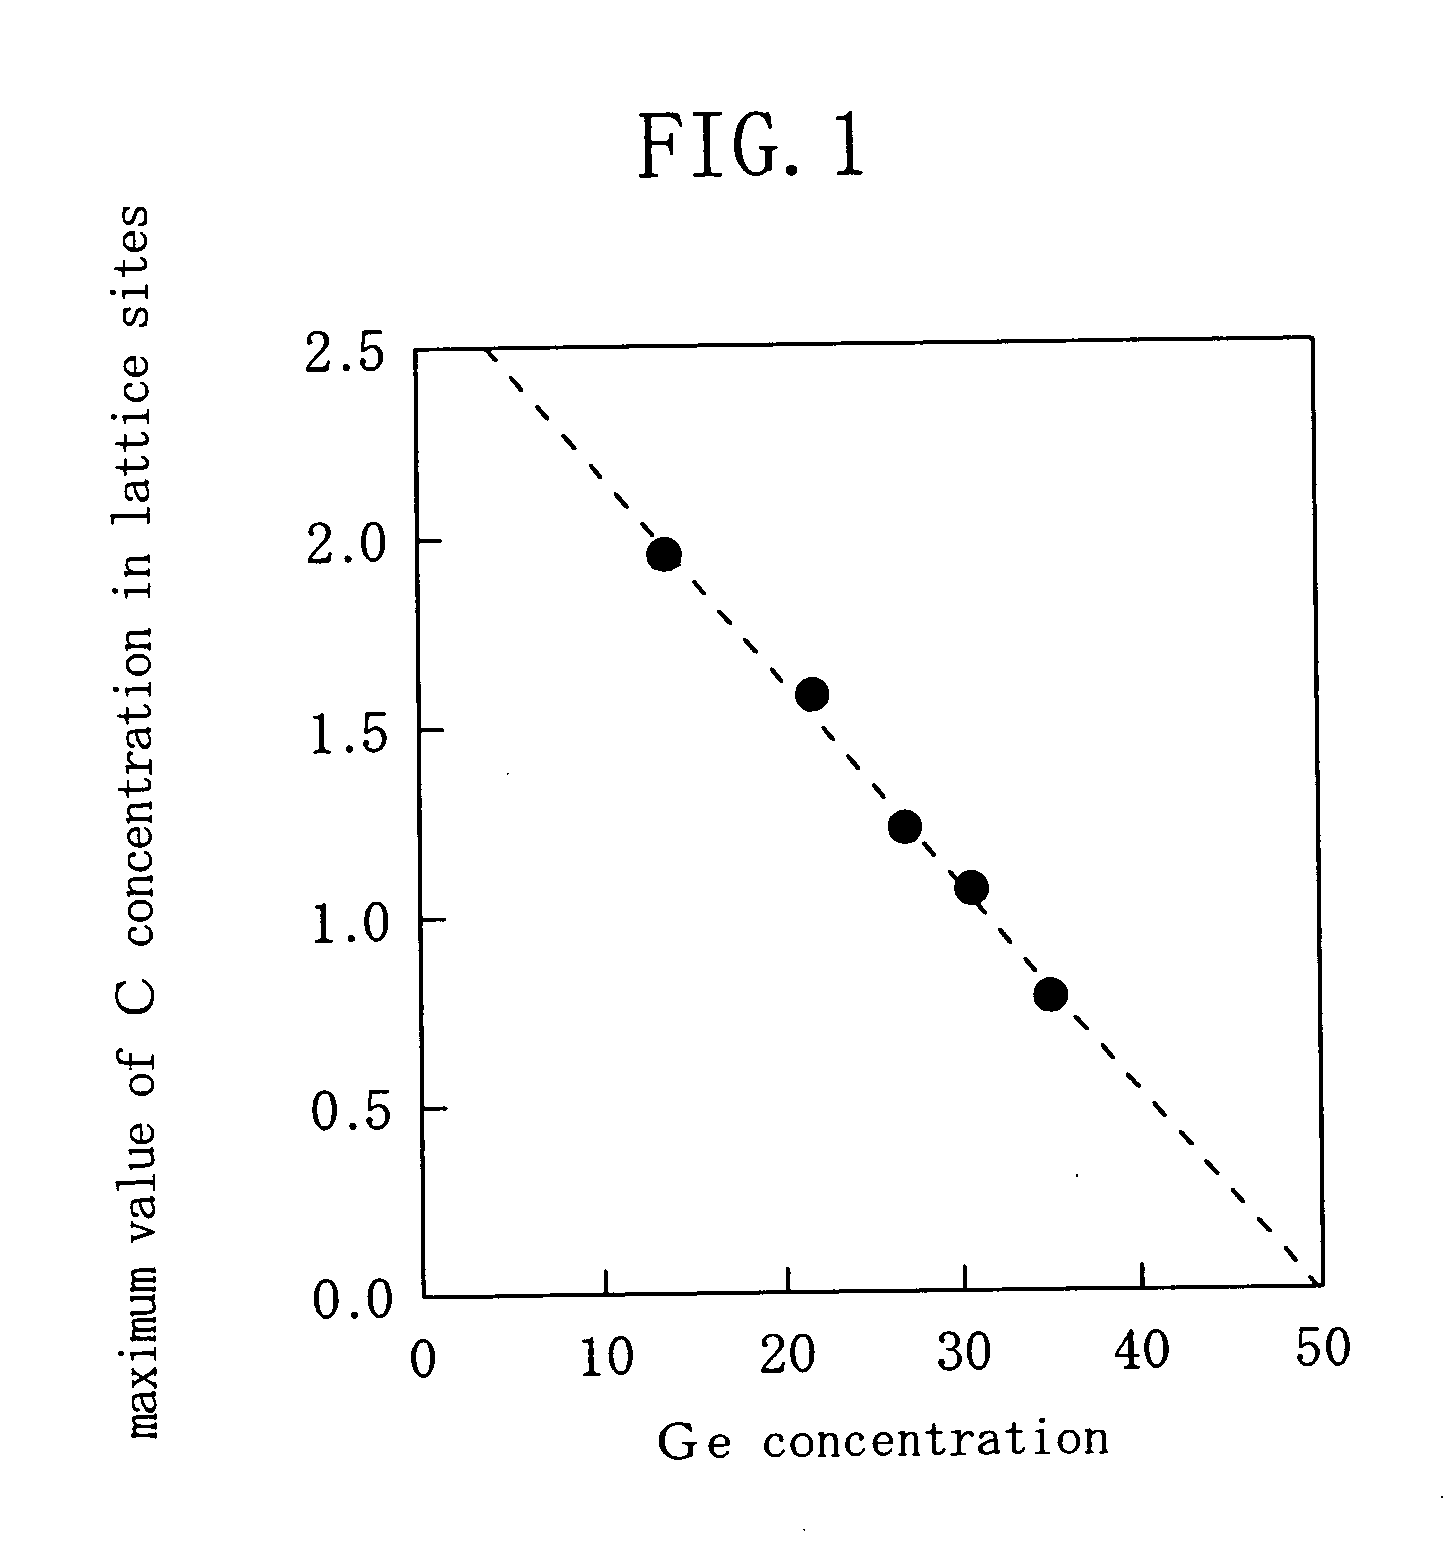 Semiconductor crystal film and method for preparation thereof